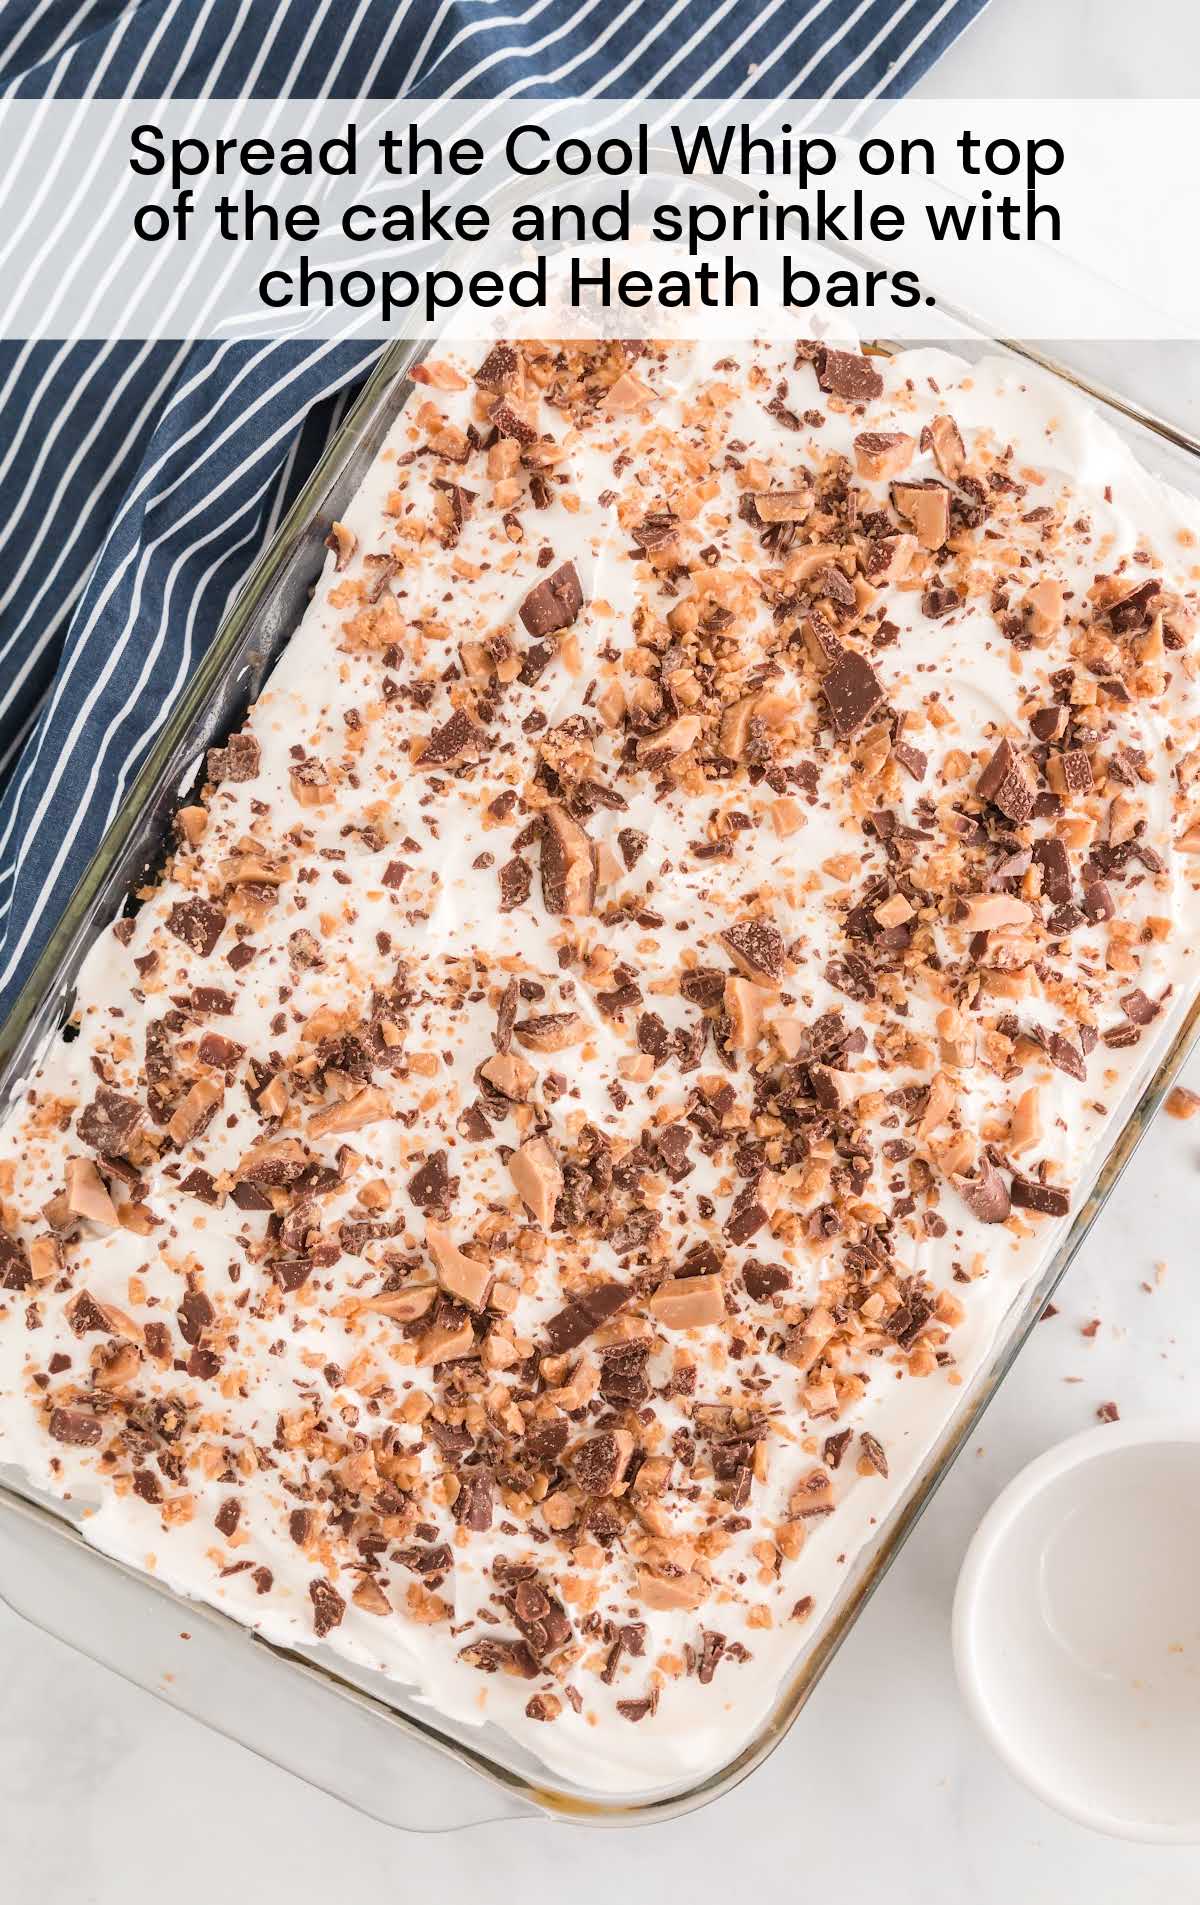 cool whip spread on top of the cake sprinkled with chopped heath bars in a baking dish